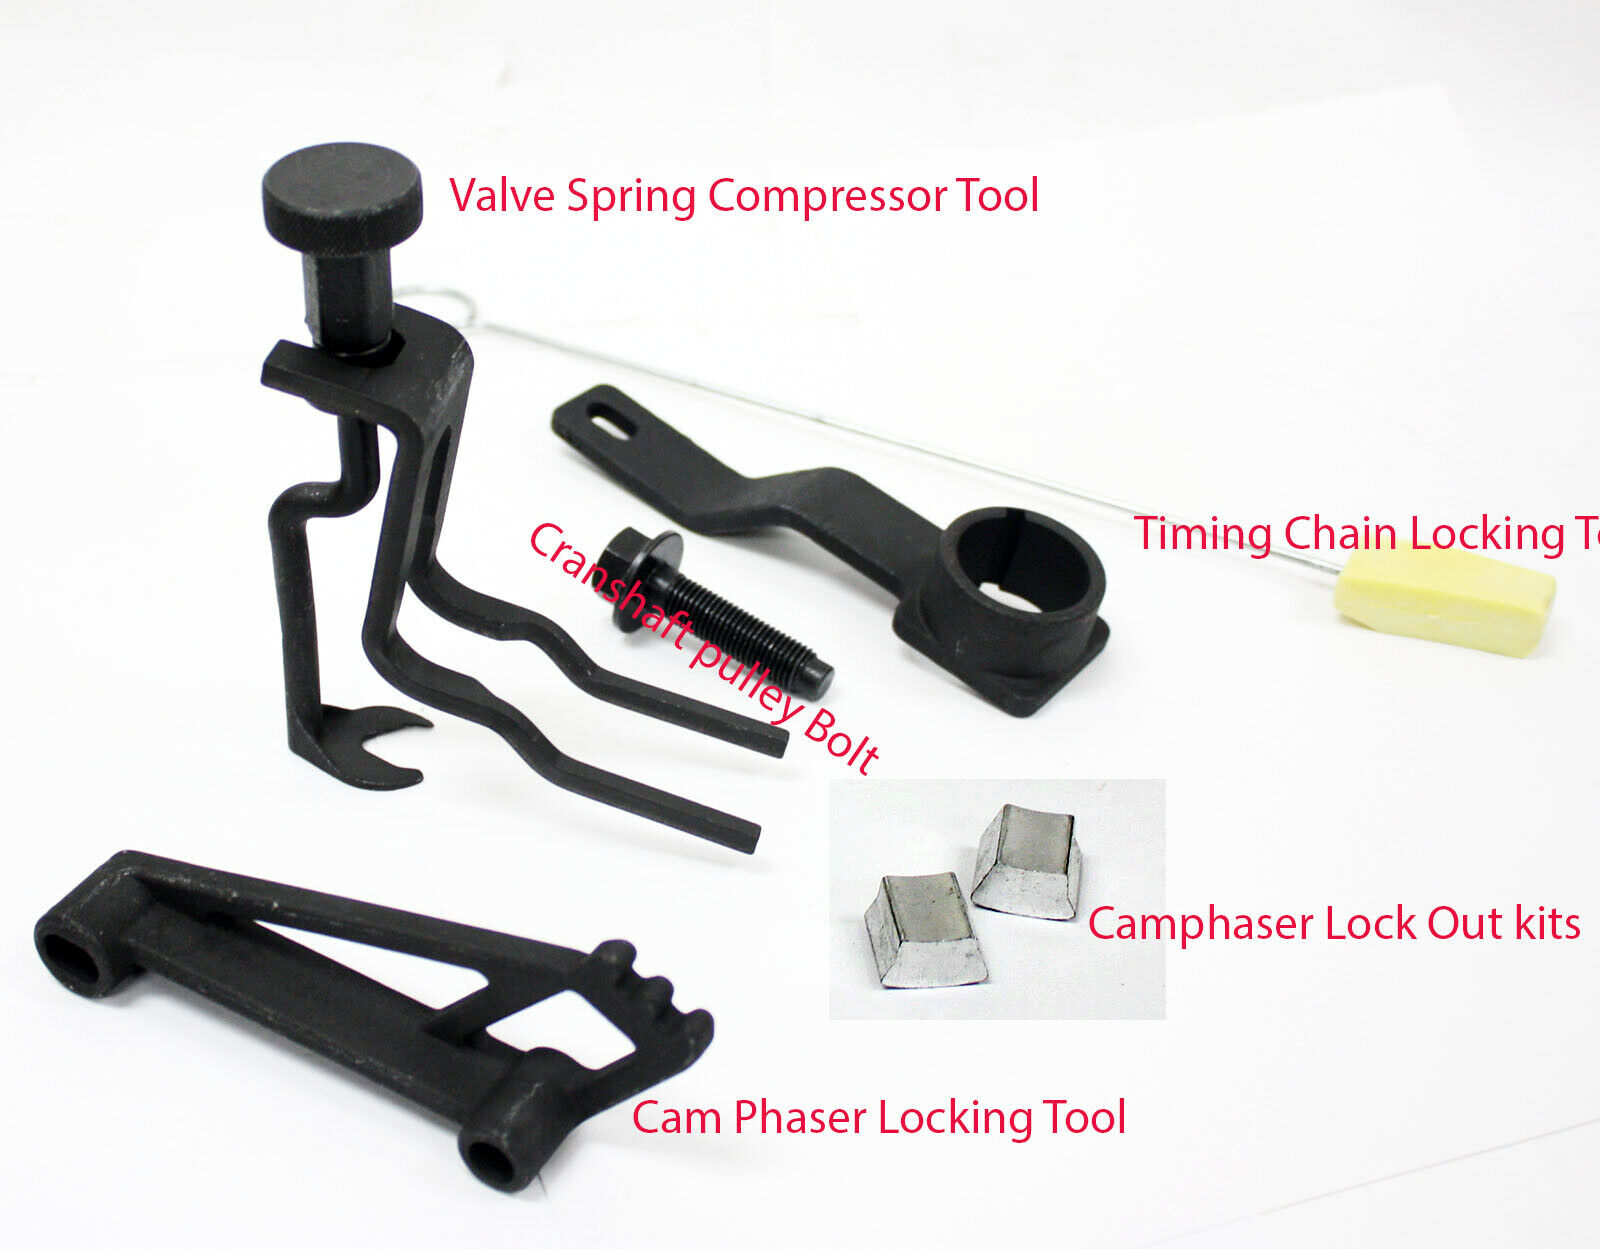 Timing Chain Locking,Cam Pasher Lock Out Kit Bolt IV TR DIESEL Crankshaft Positioning Tool for Ford 